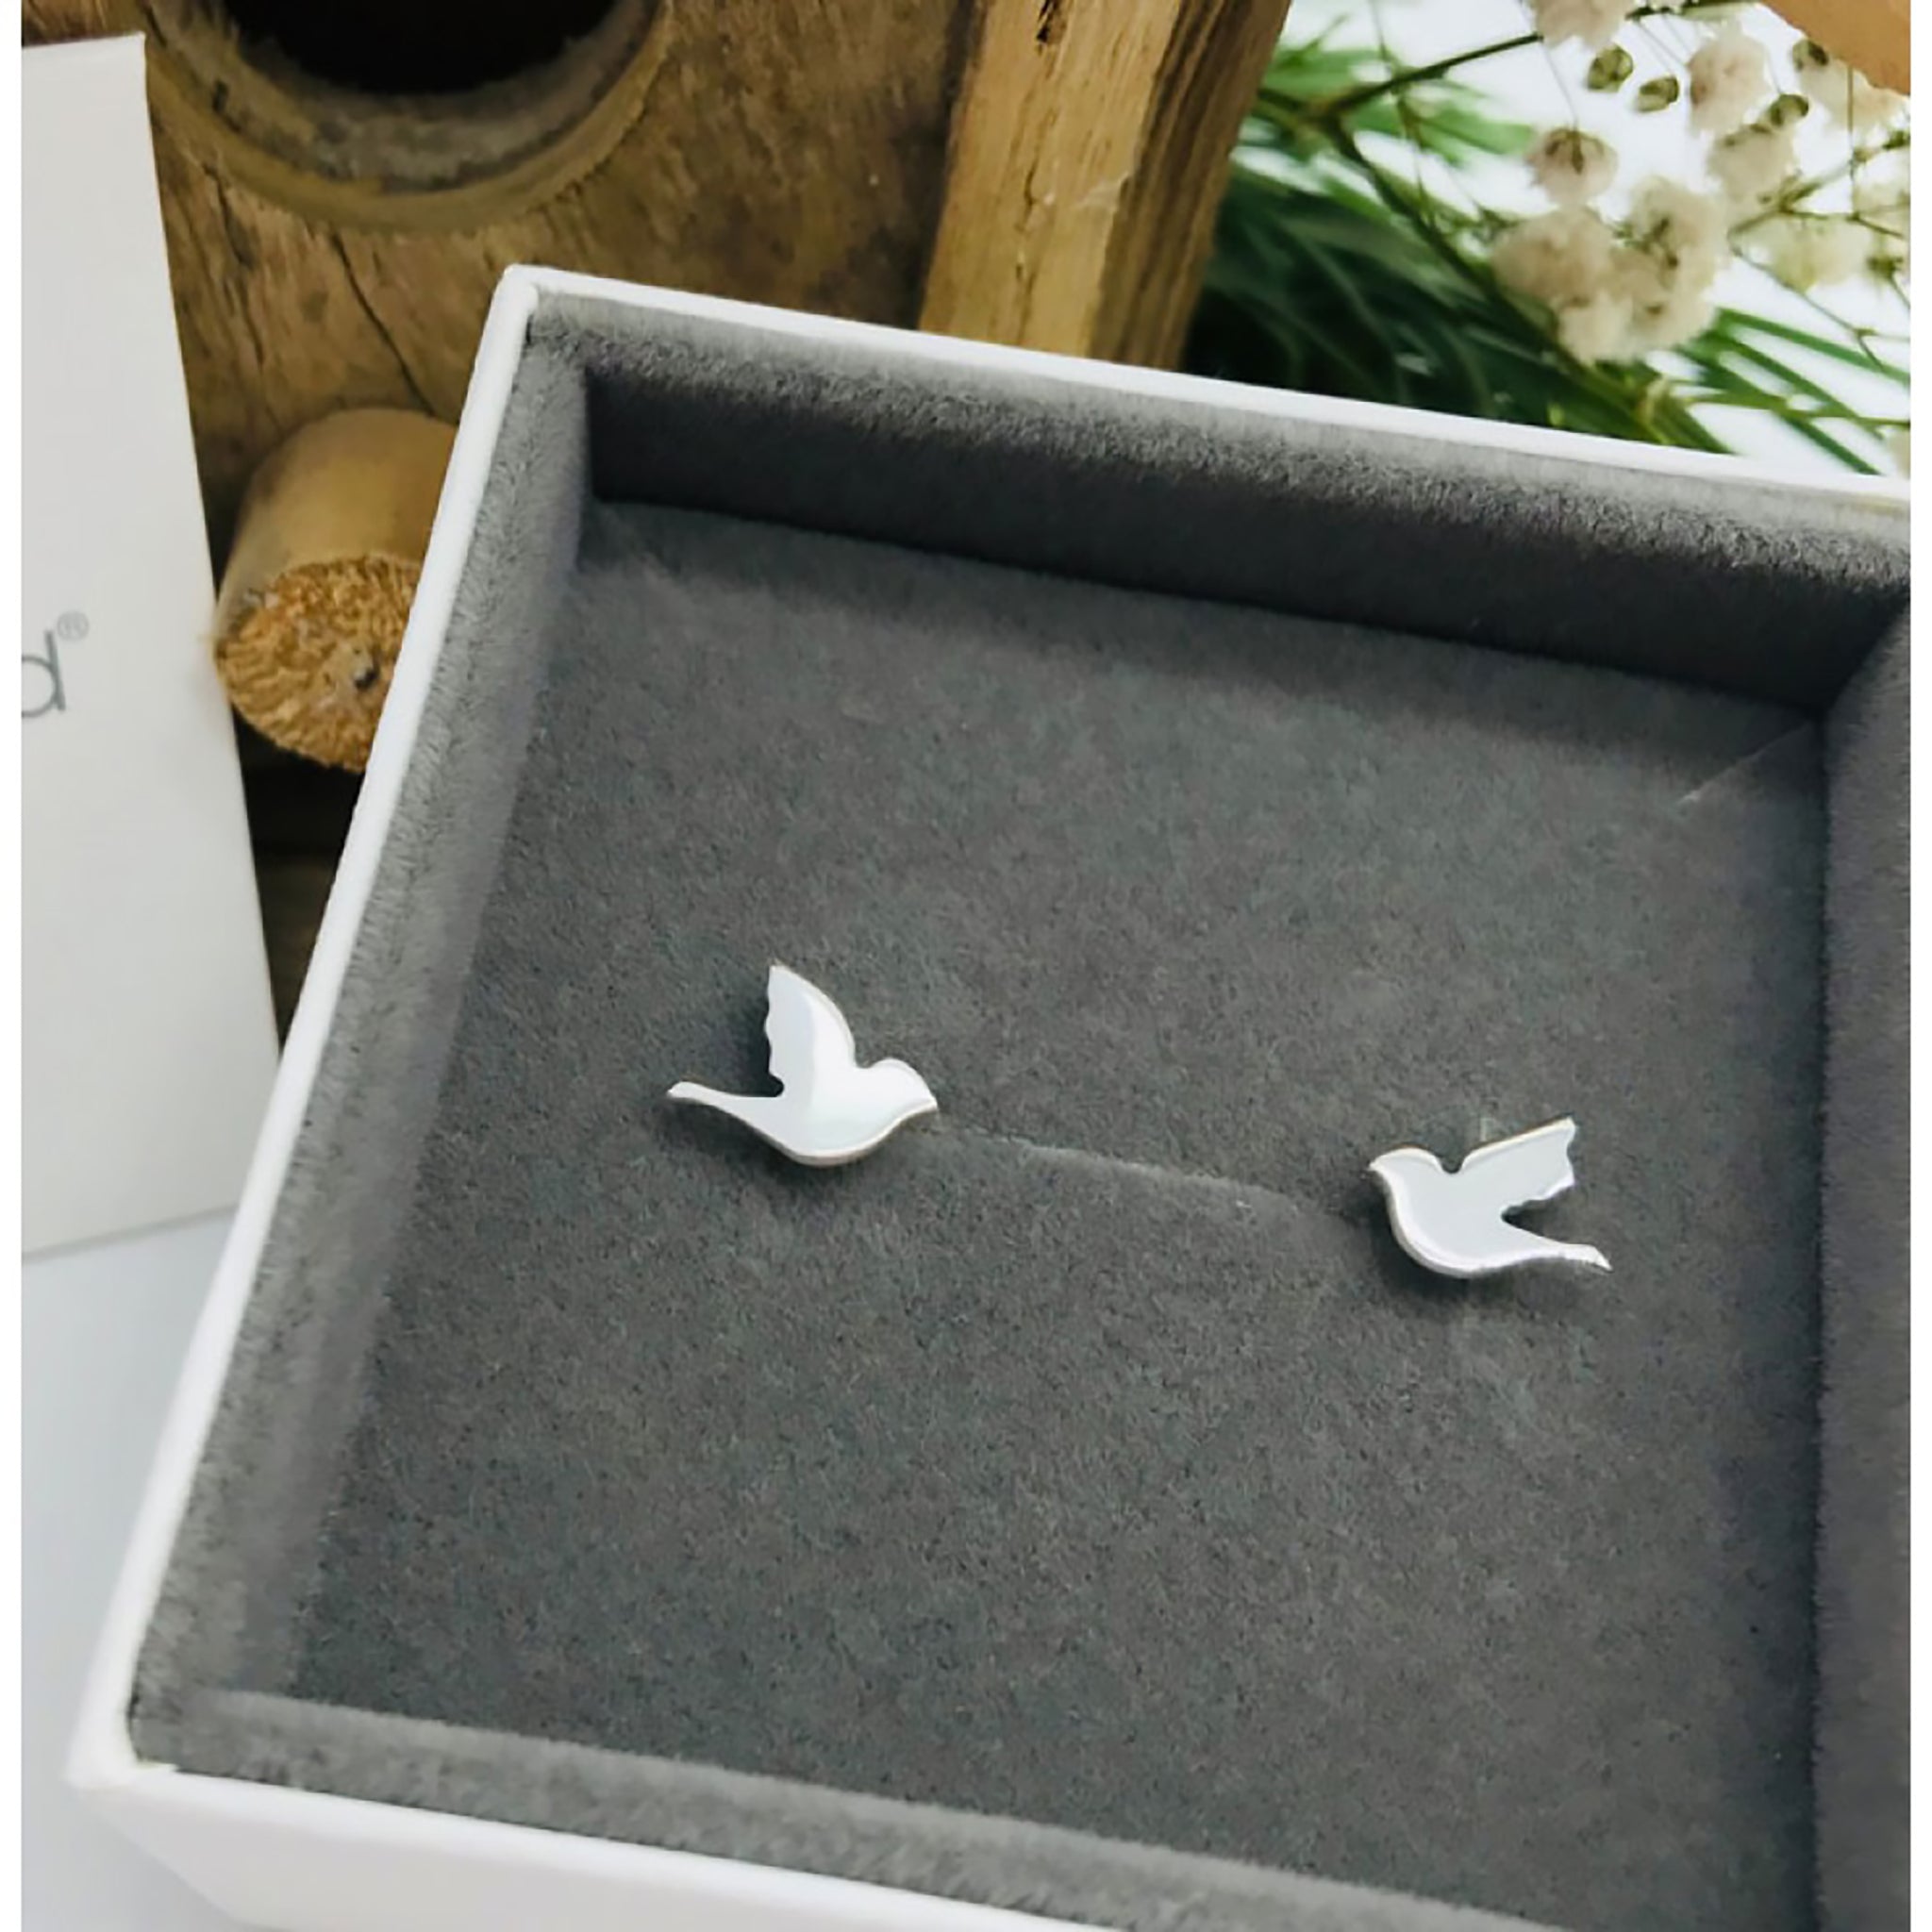 Simple silver bird shaped earrings with stud fittings in box